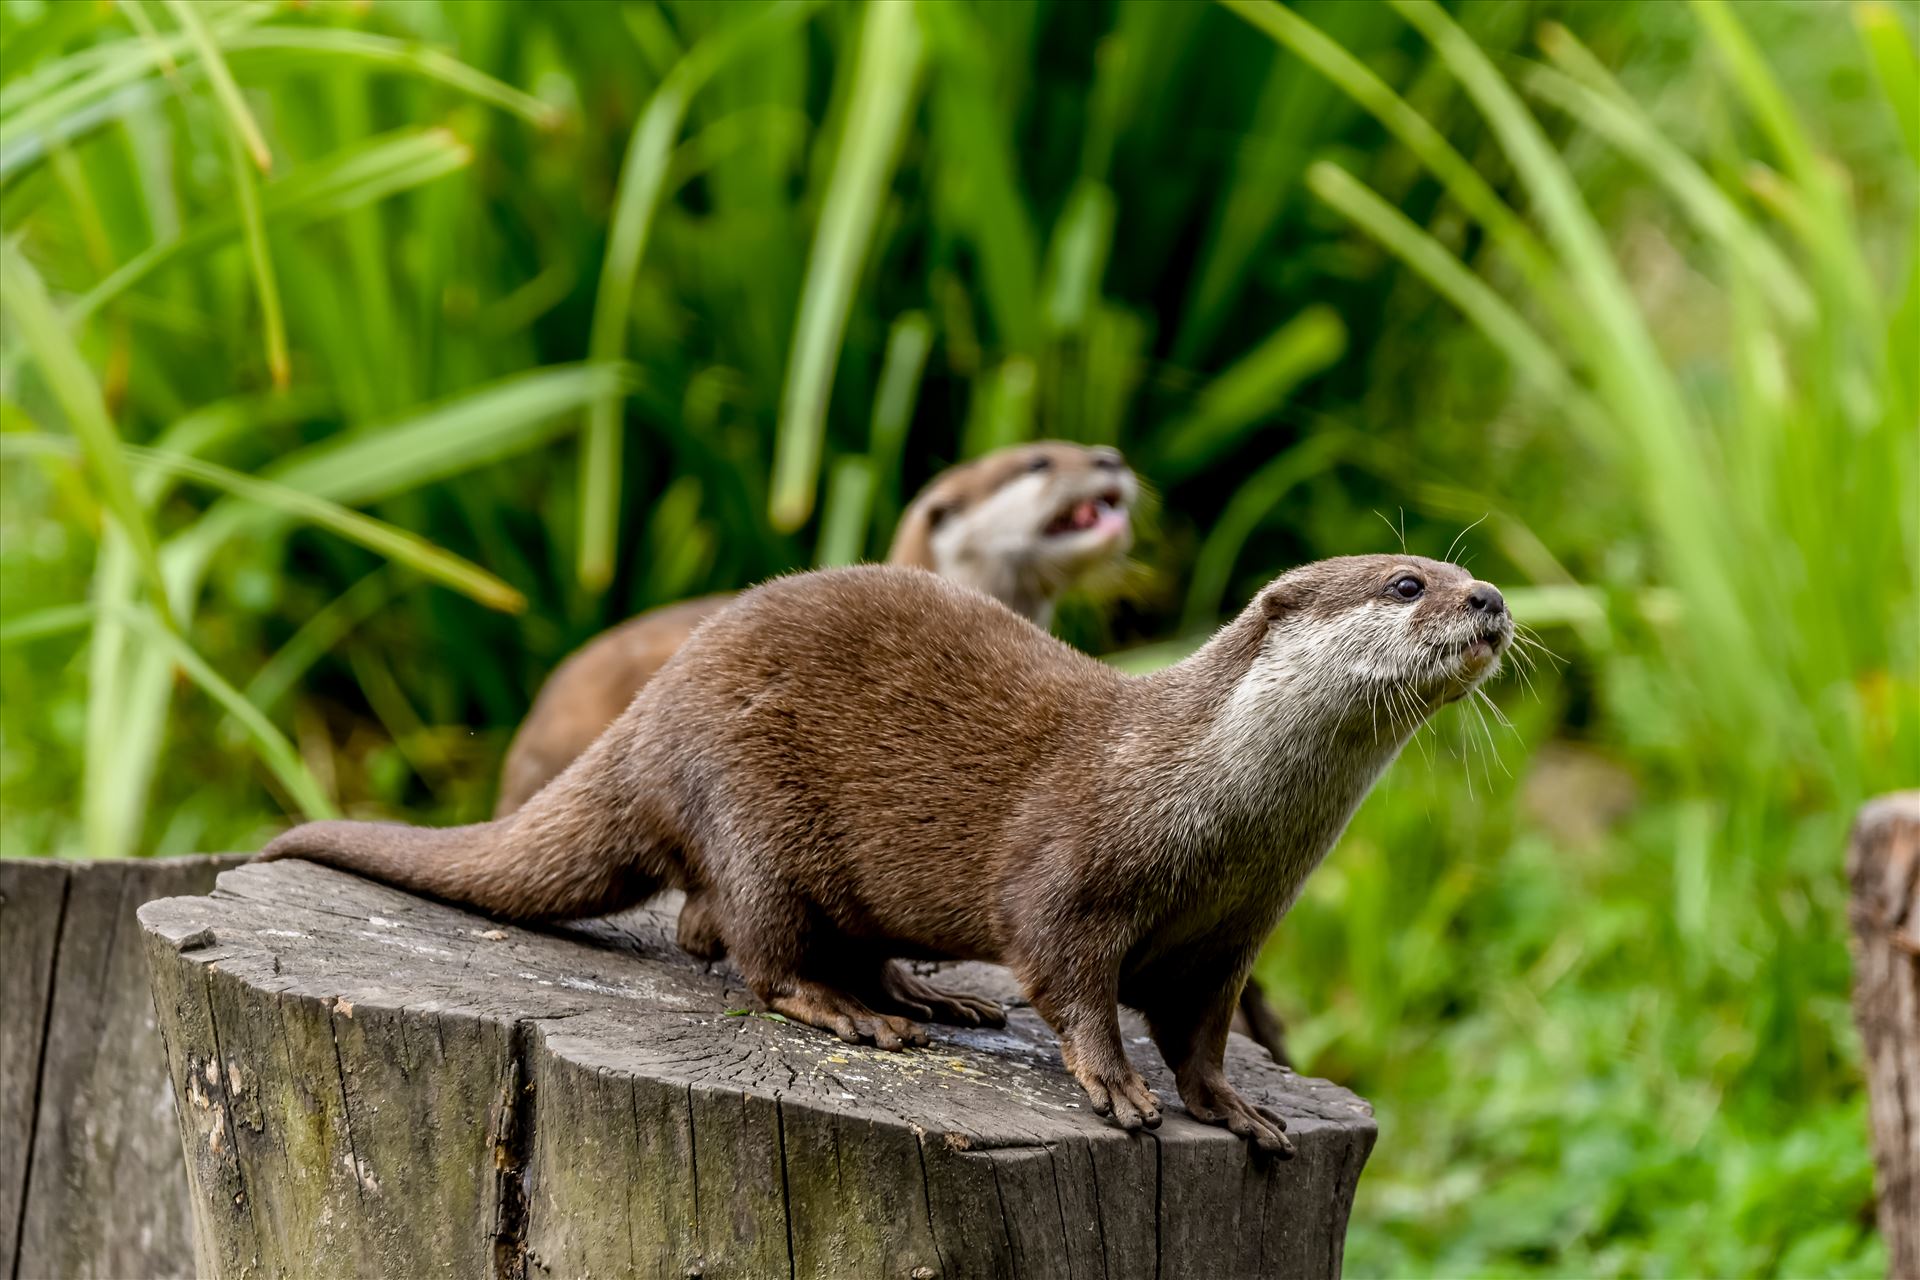 Asian short clawed otter - Asian short clawed otters at Washington WWT by philreay